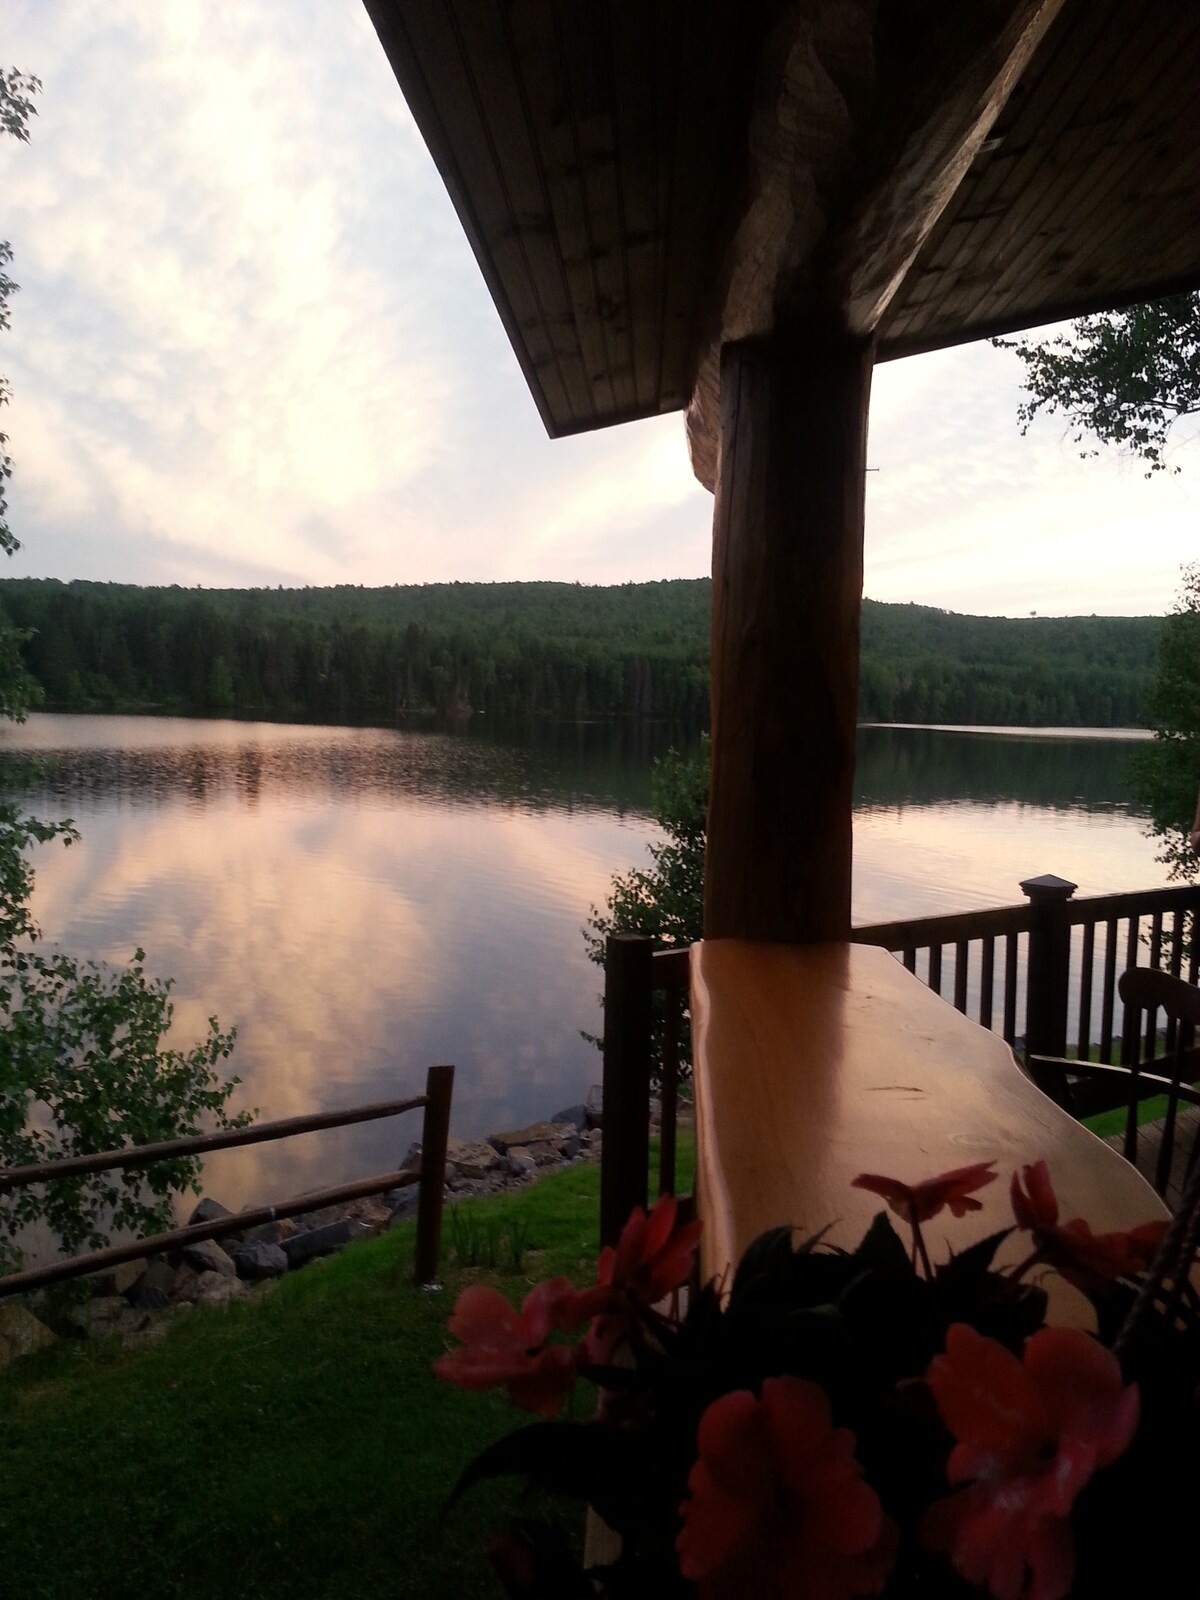 Crawford 's Roost on the Tobique River Headpond